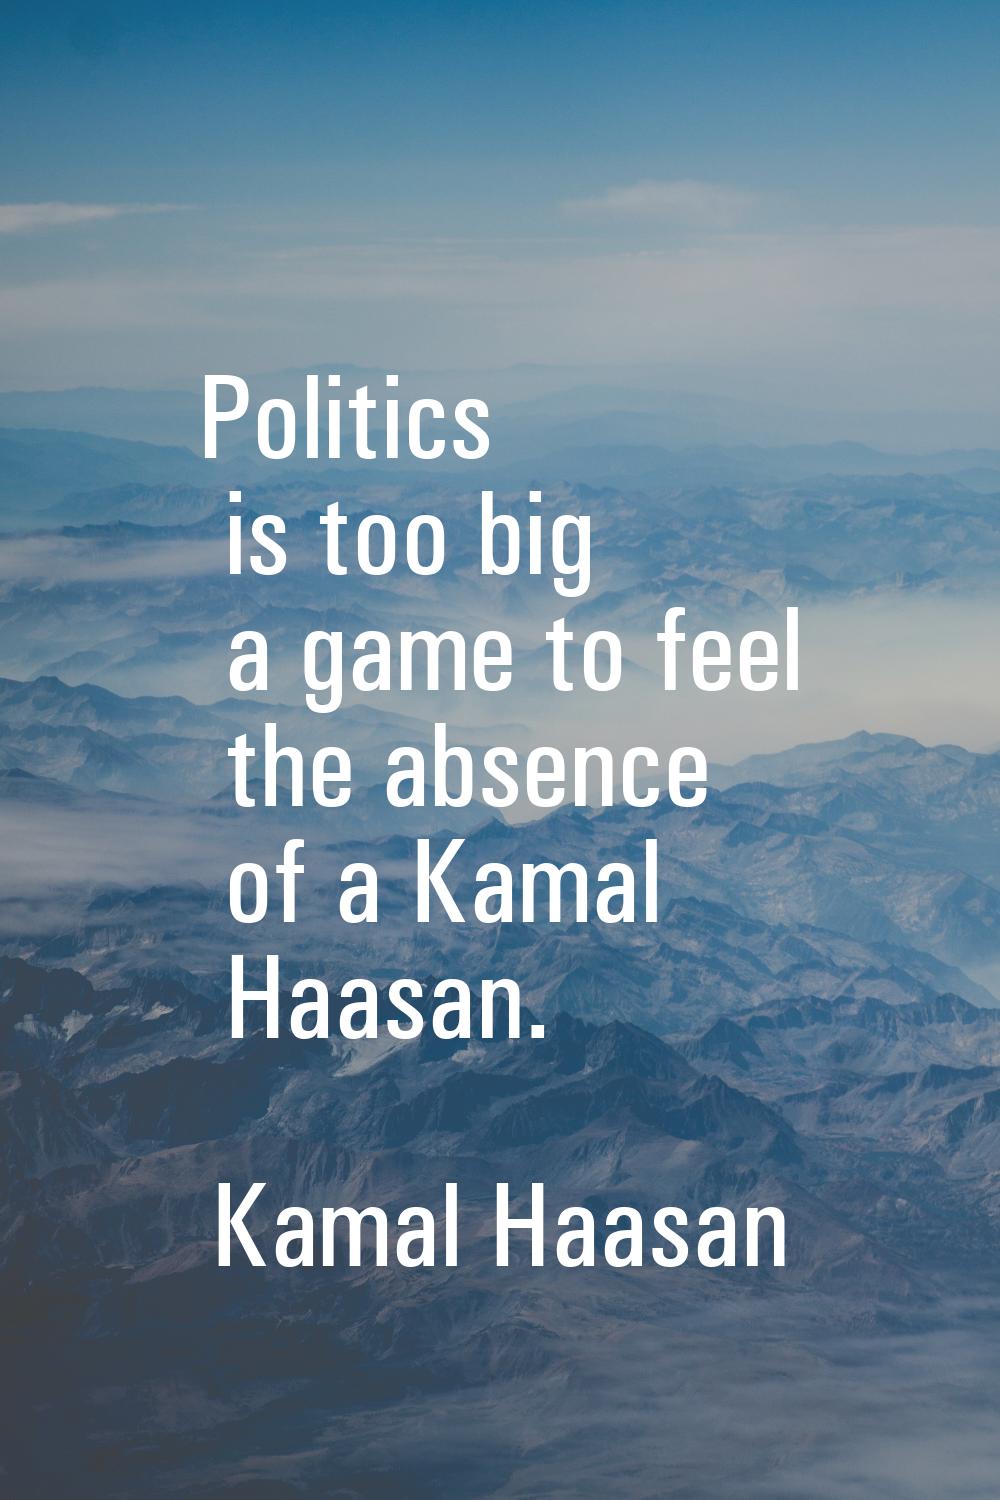 Politics is too big a game to feel the absence of a Kamal Haasan.